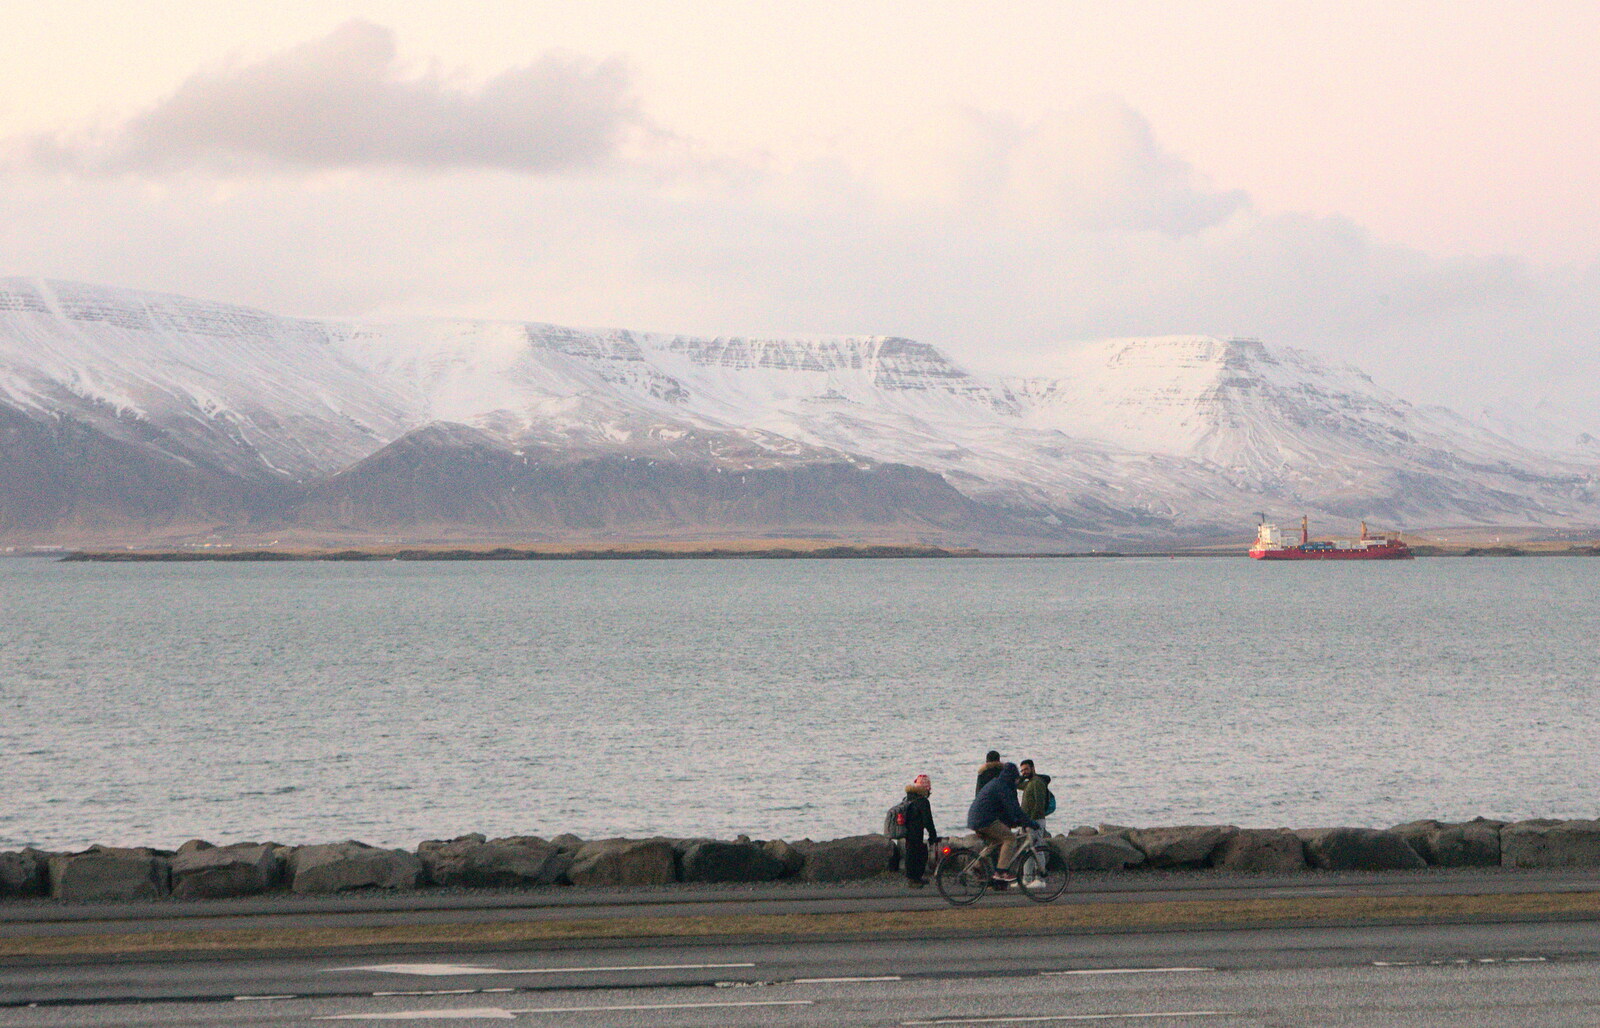 Faxaflói Bay from A Trip to Reykjavik, Iceland - 20th April 2017